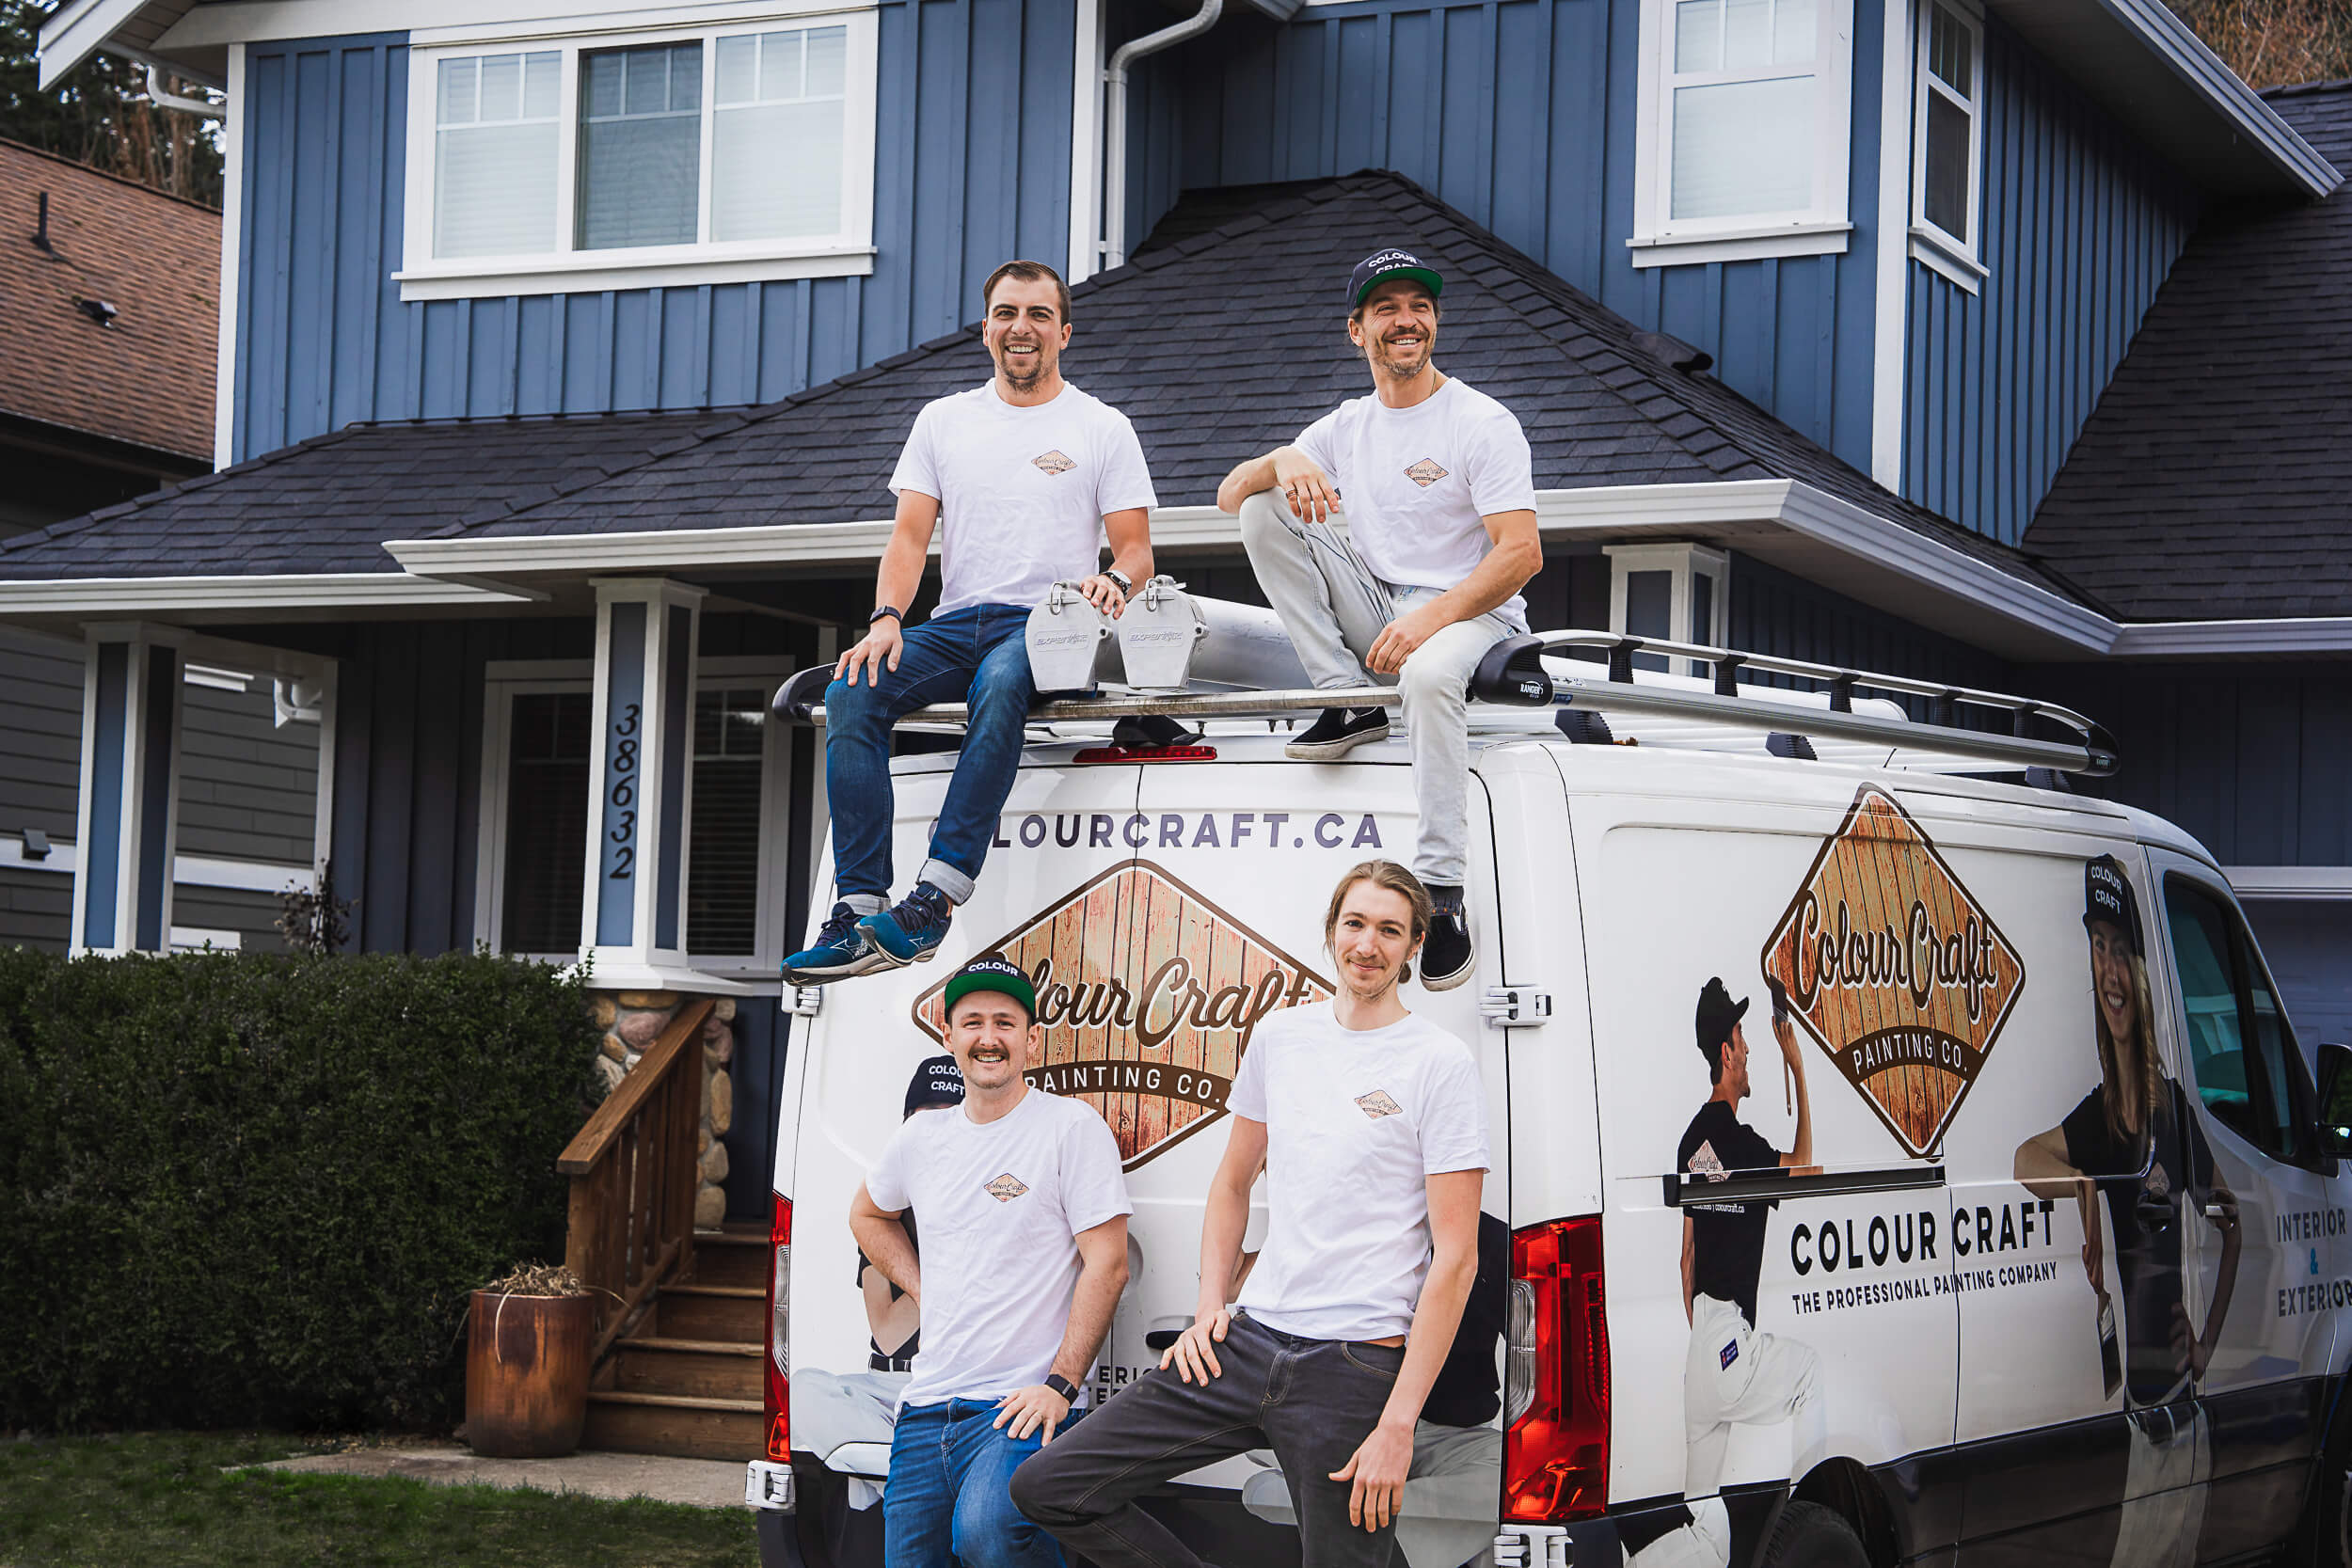 This image depicts a group from Colour Craft Painting, relaxed and cheerful, indicating a successful project completion. Their teamwork and positive company culture are front and center, making this a compelling representation of lifestyle photography for the business.